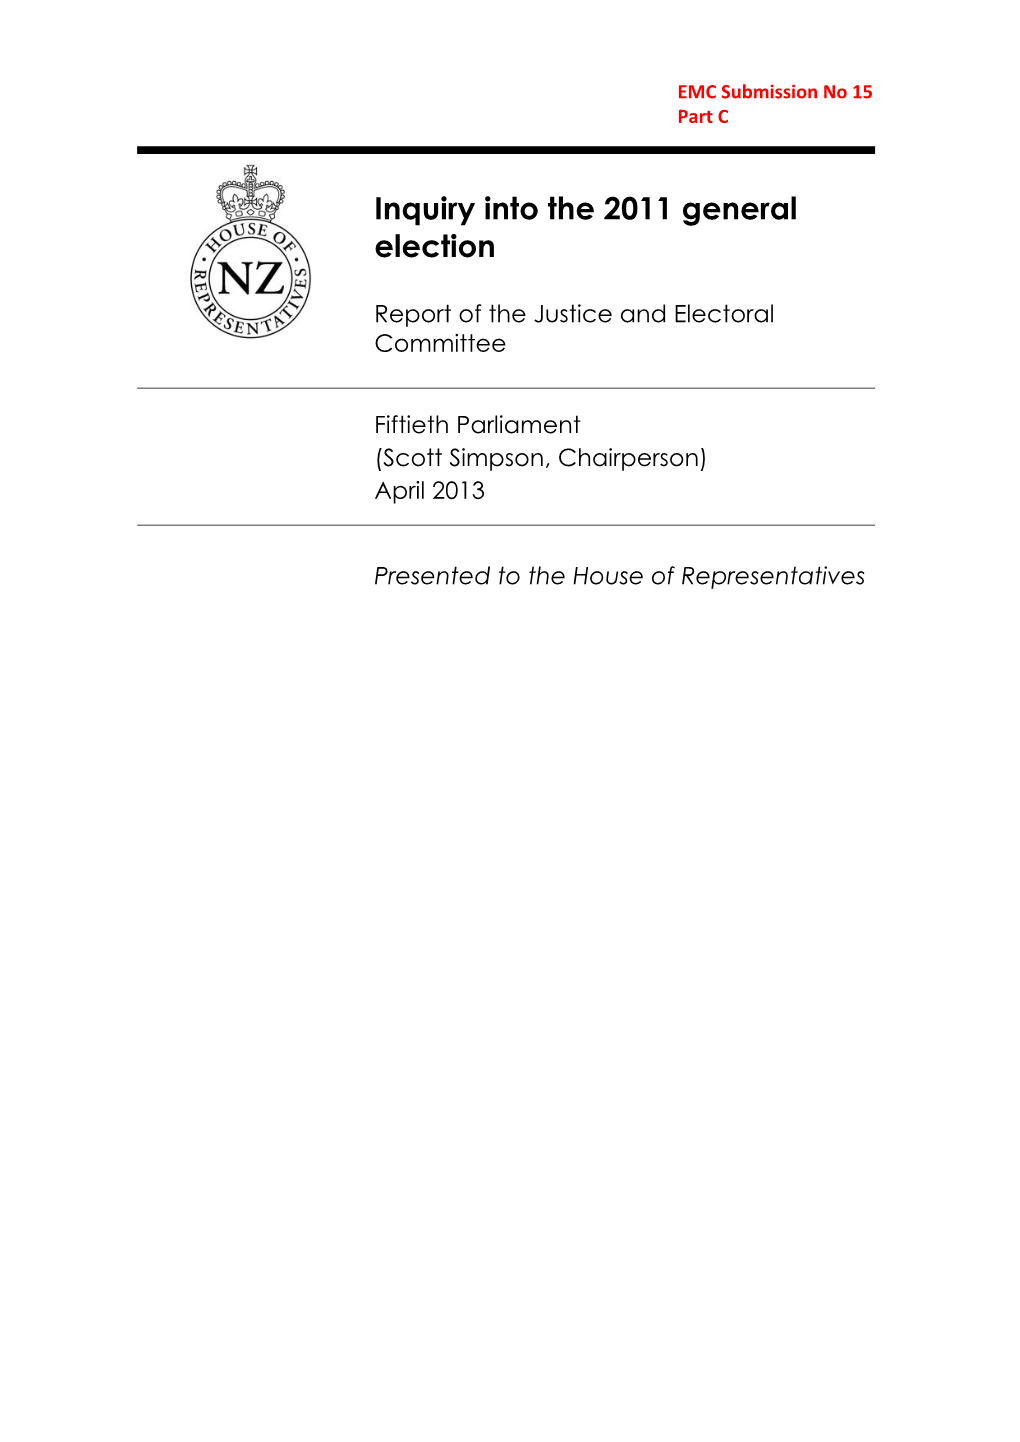 Inquiry Into the 2011 General Election